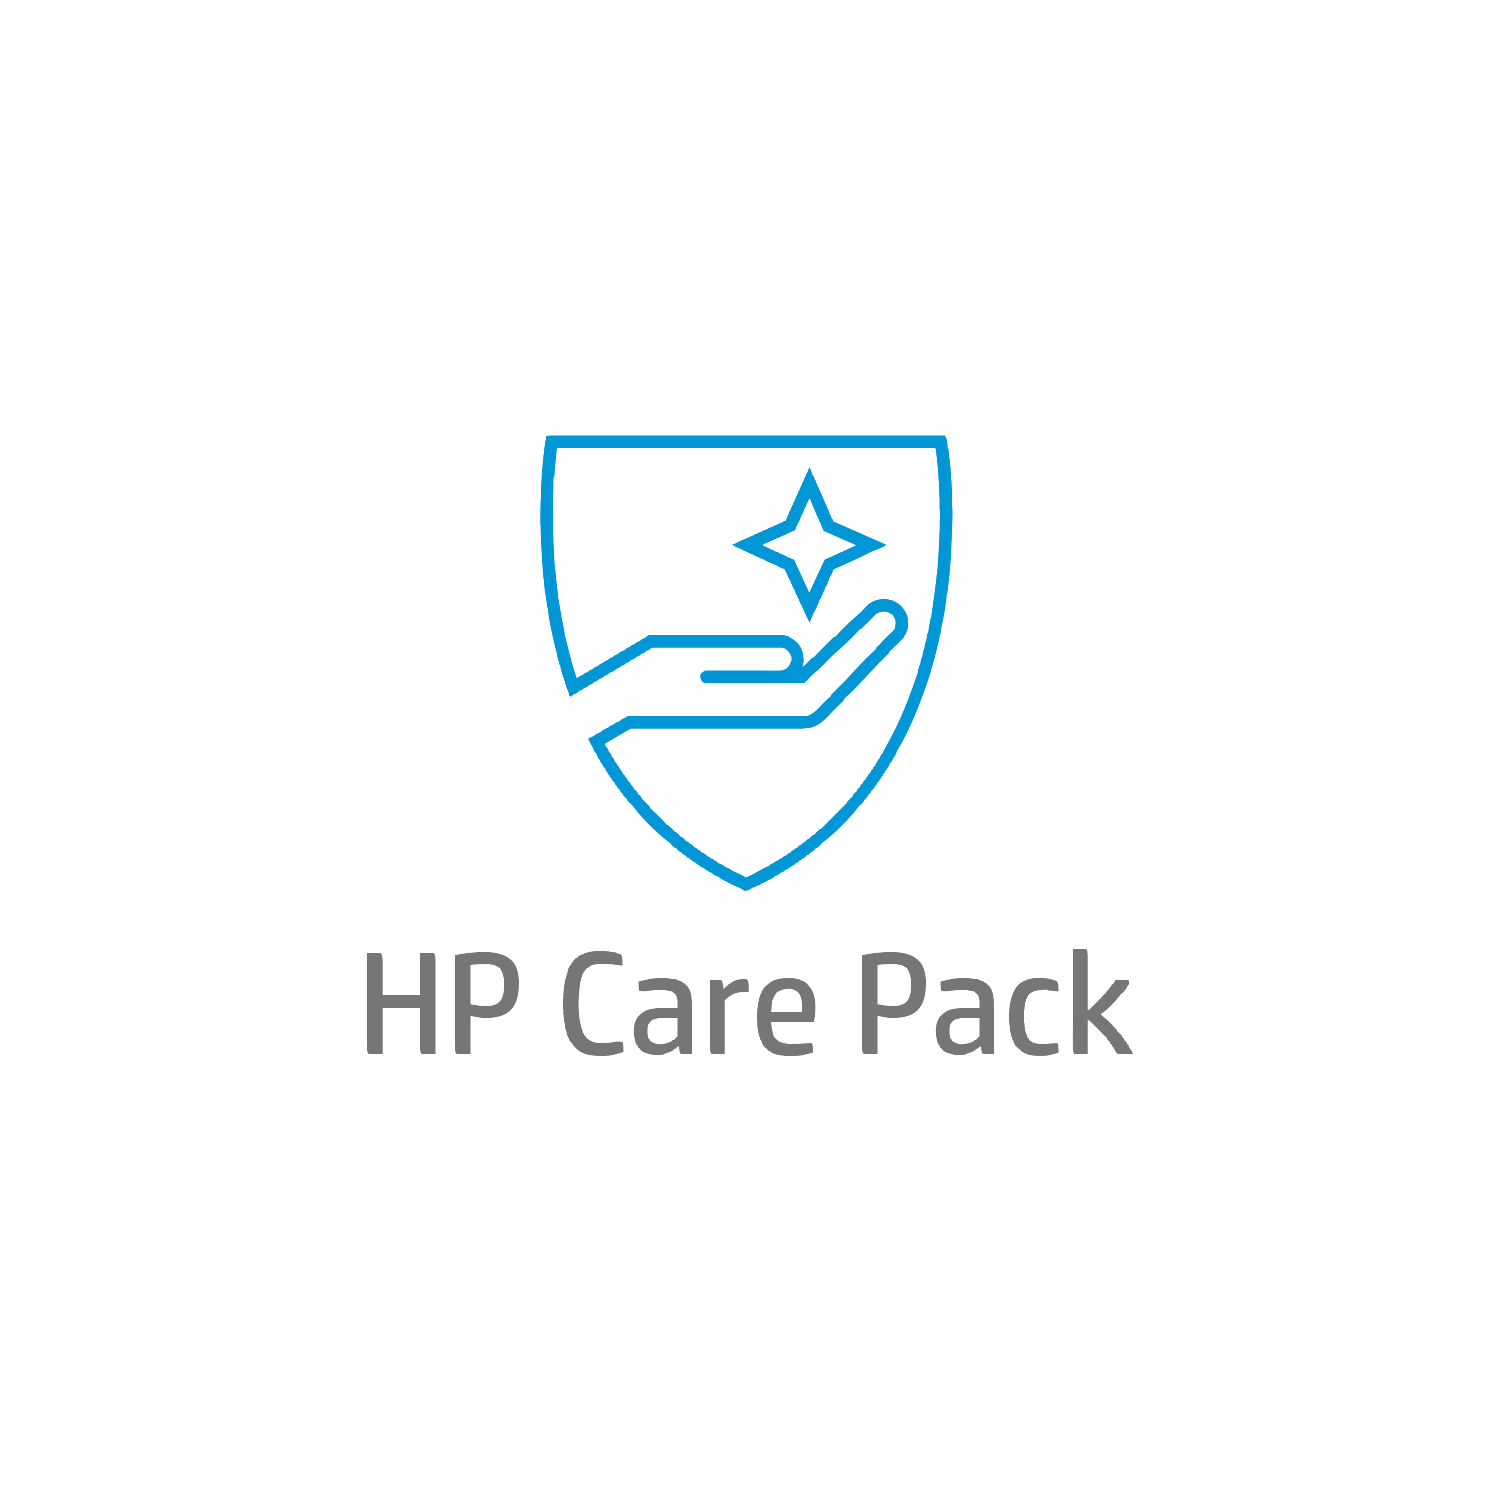 Bild von HP 1y 9x5 AC Prnt ScnProBdl 10,000+ Lic SW Support REQUIRED for each sofware license purchased. - Remote software assistance - Remote - In warranty - Standard workdays - 9 hours - 1 year - Next available agent